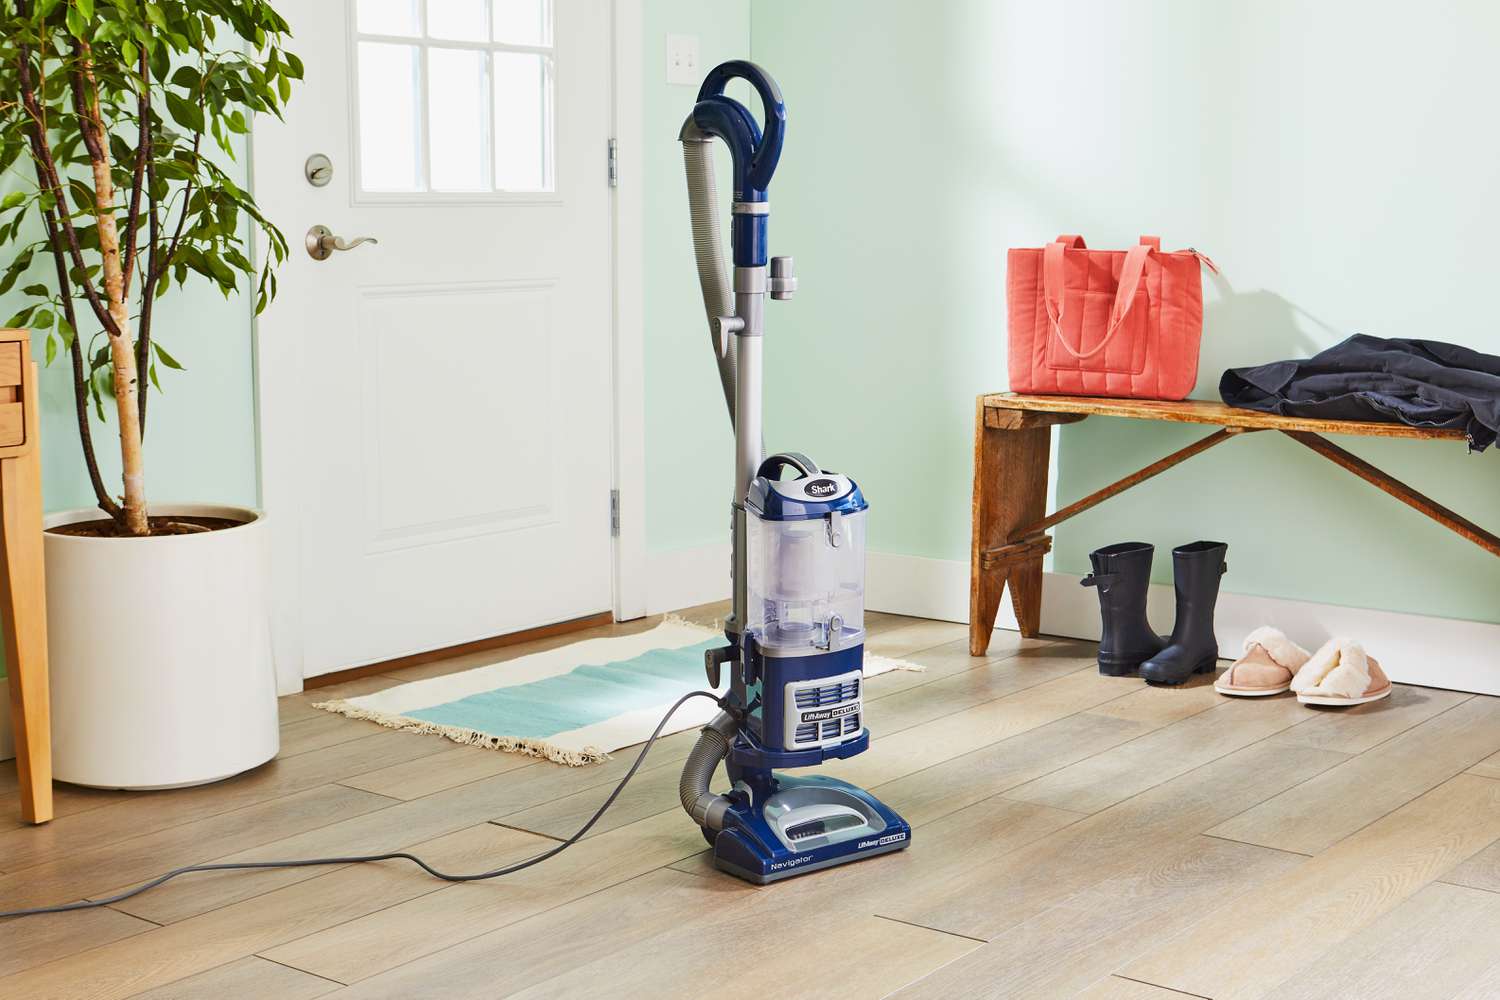 Shark NV360 Navigator Lift-Away Deluxe Upright Vacuum displayed in an entryway next to bench and plant